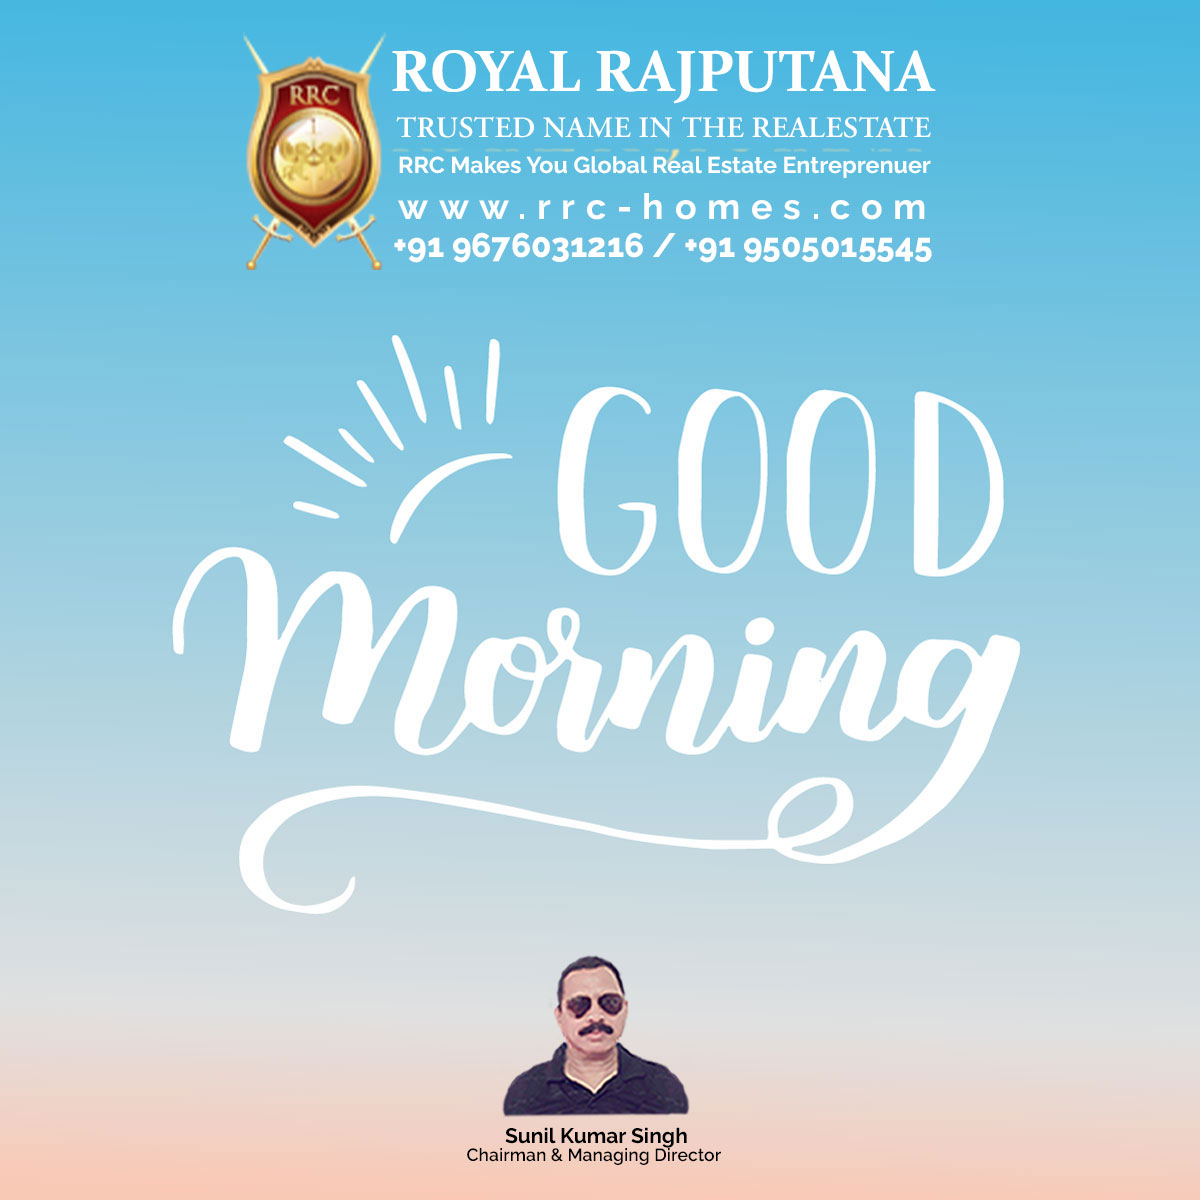 Take Every chance you get in life because some things only happen once. Good Morning!!!
#royalrajputana #royalrajputanahomes #rrc #rrchomes #propertyservices #faqs #materialsupply #buildingprojects #hmdaprojects #infradevelopers #goodmorning #life #blessing #day #quotes